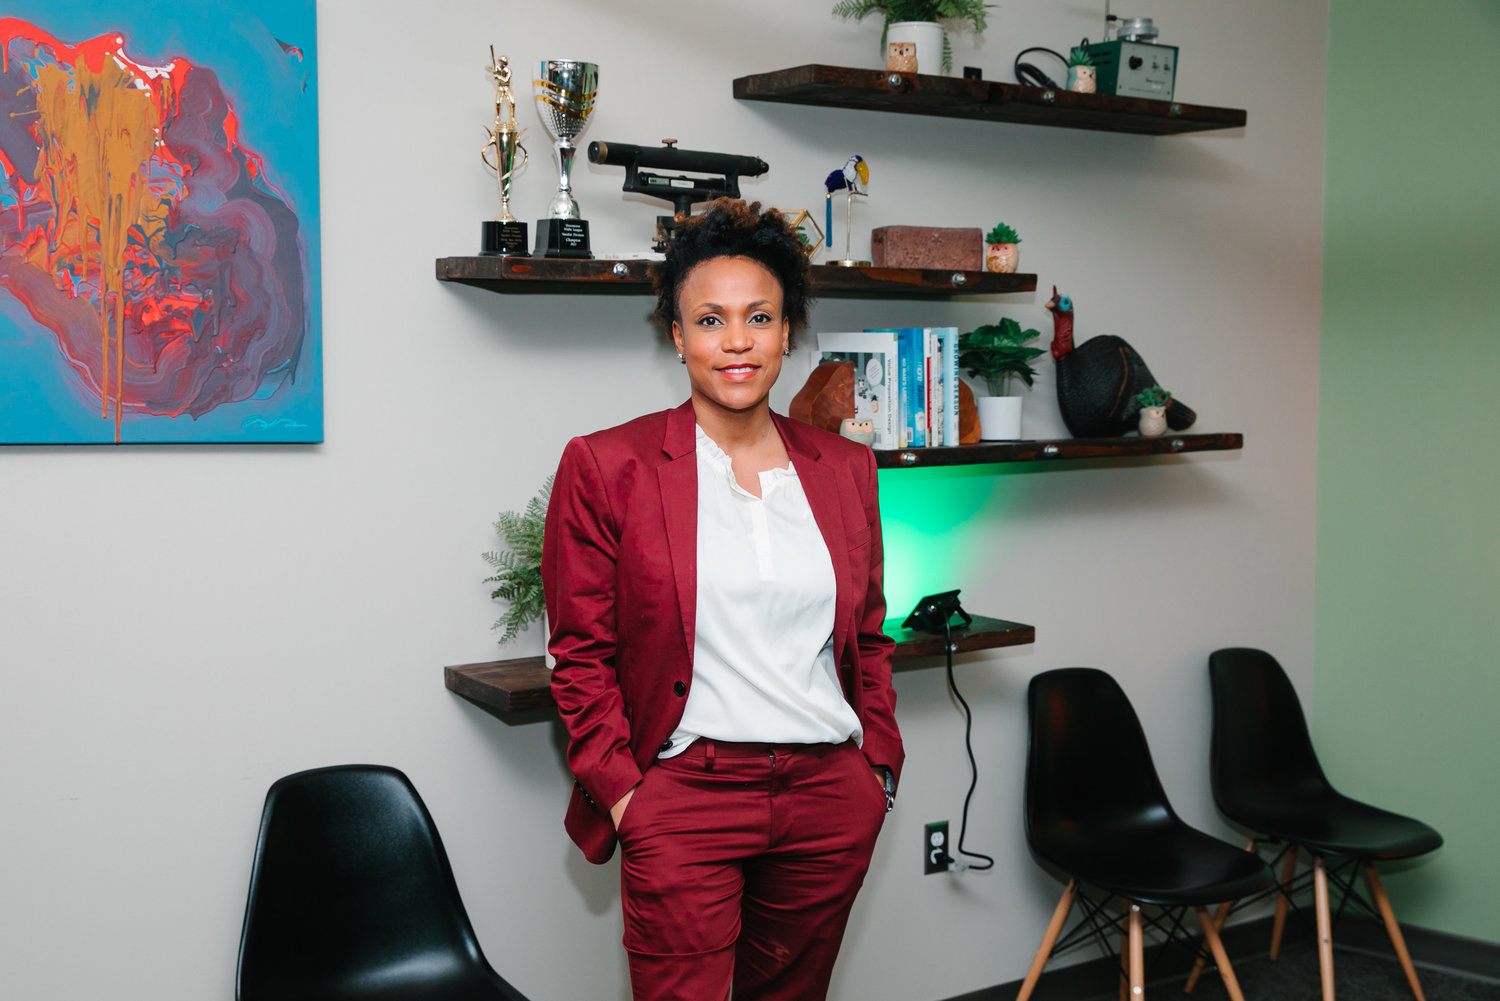 Darline Mabins is leading the former Minorities in Business nonprofit into a new direction with an emphasis on inclusion.